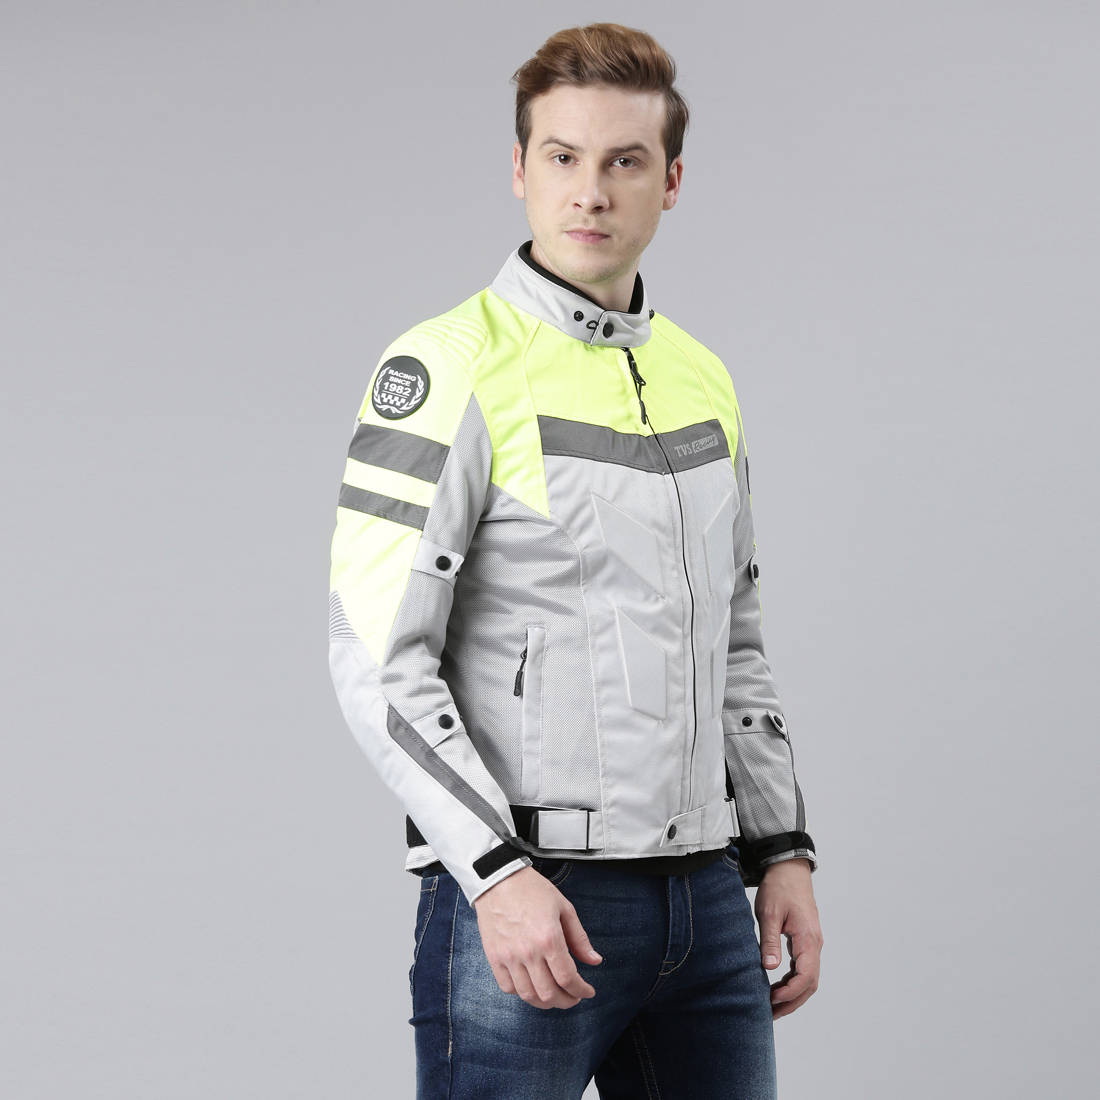  TVS Racing Challenger 3-Layer Riding Jacket for Men- All Weather Adaptability, CE Level 2 Armour Protection – Premium Bike Jackets for Bikers (White)